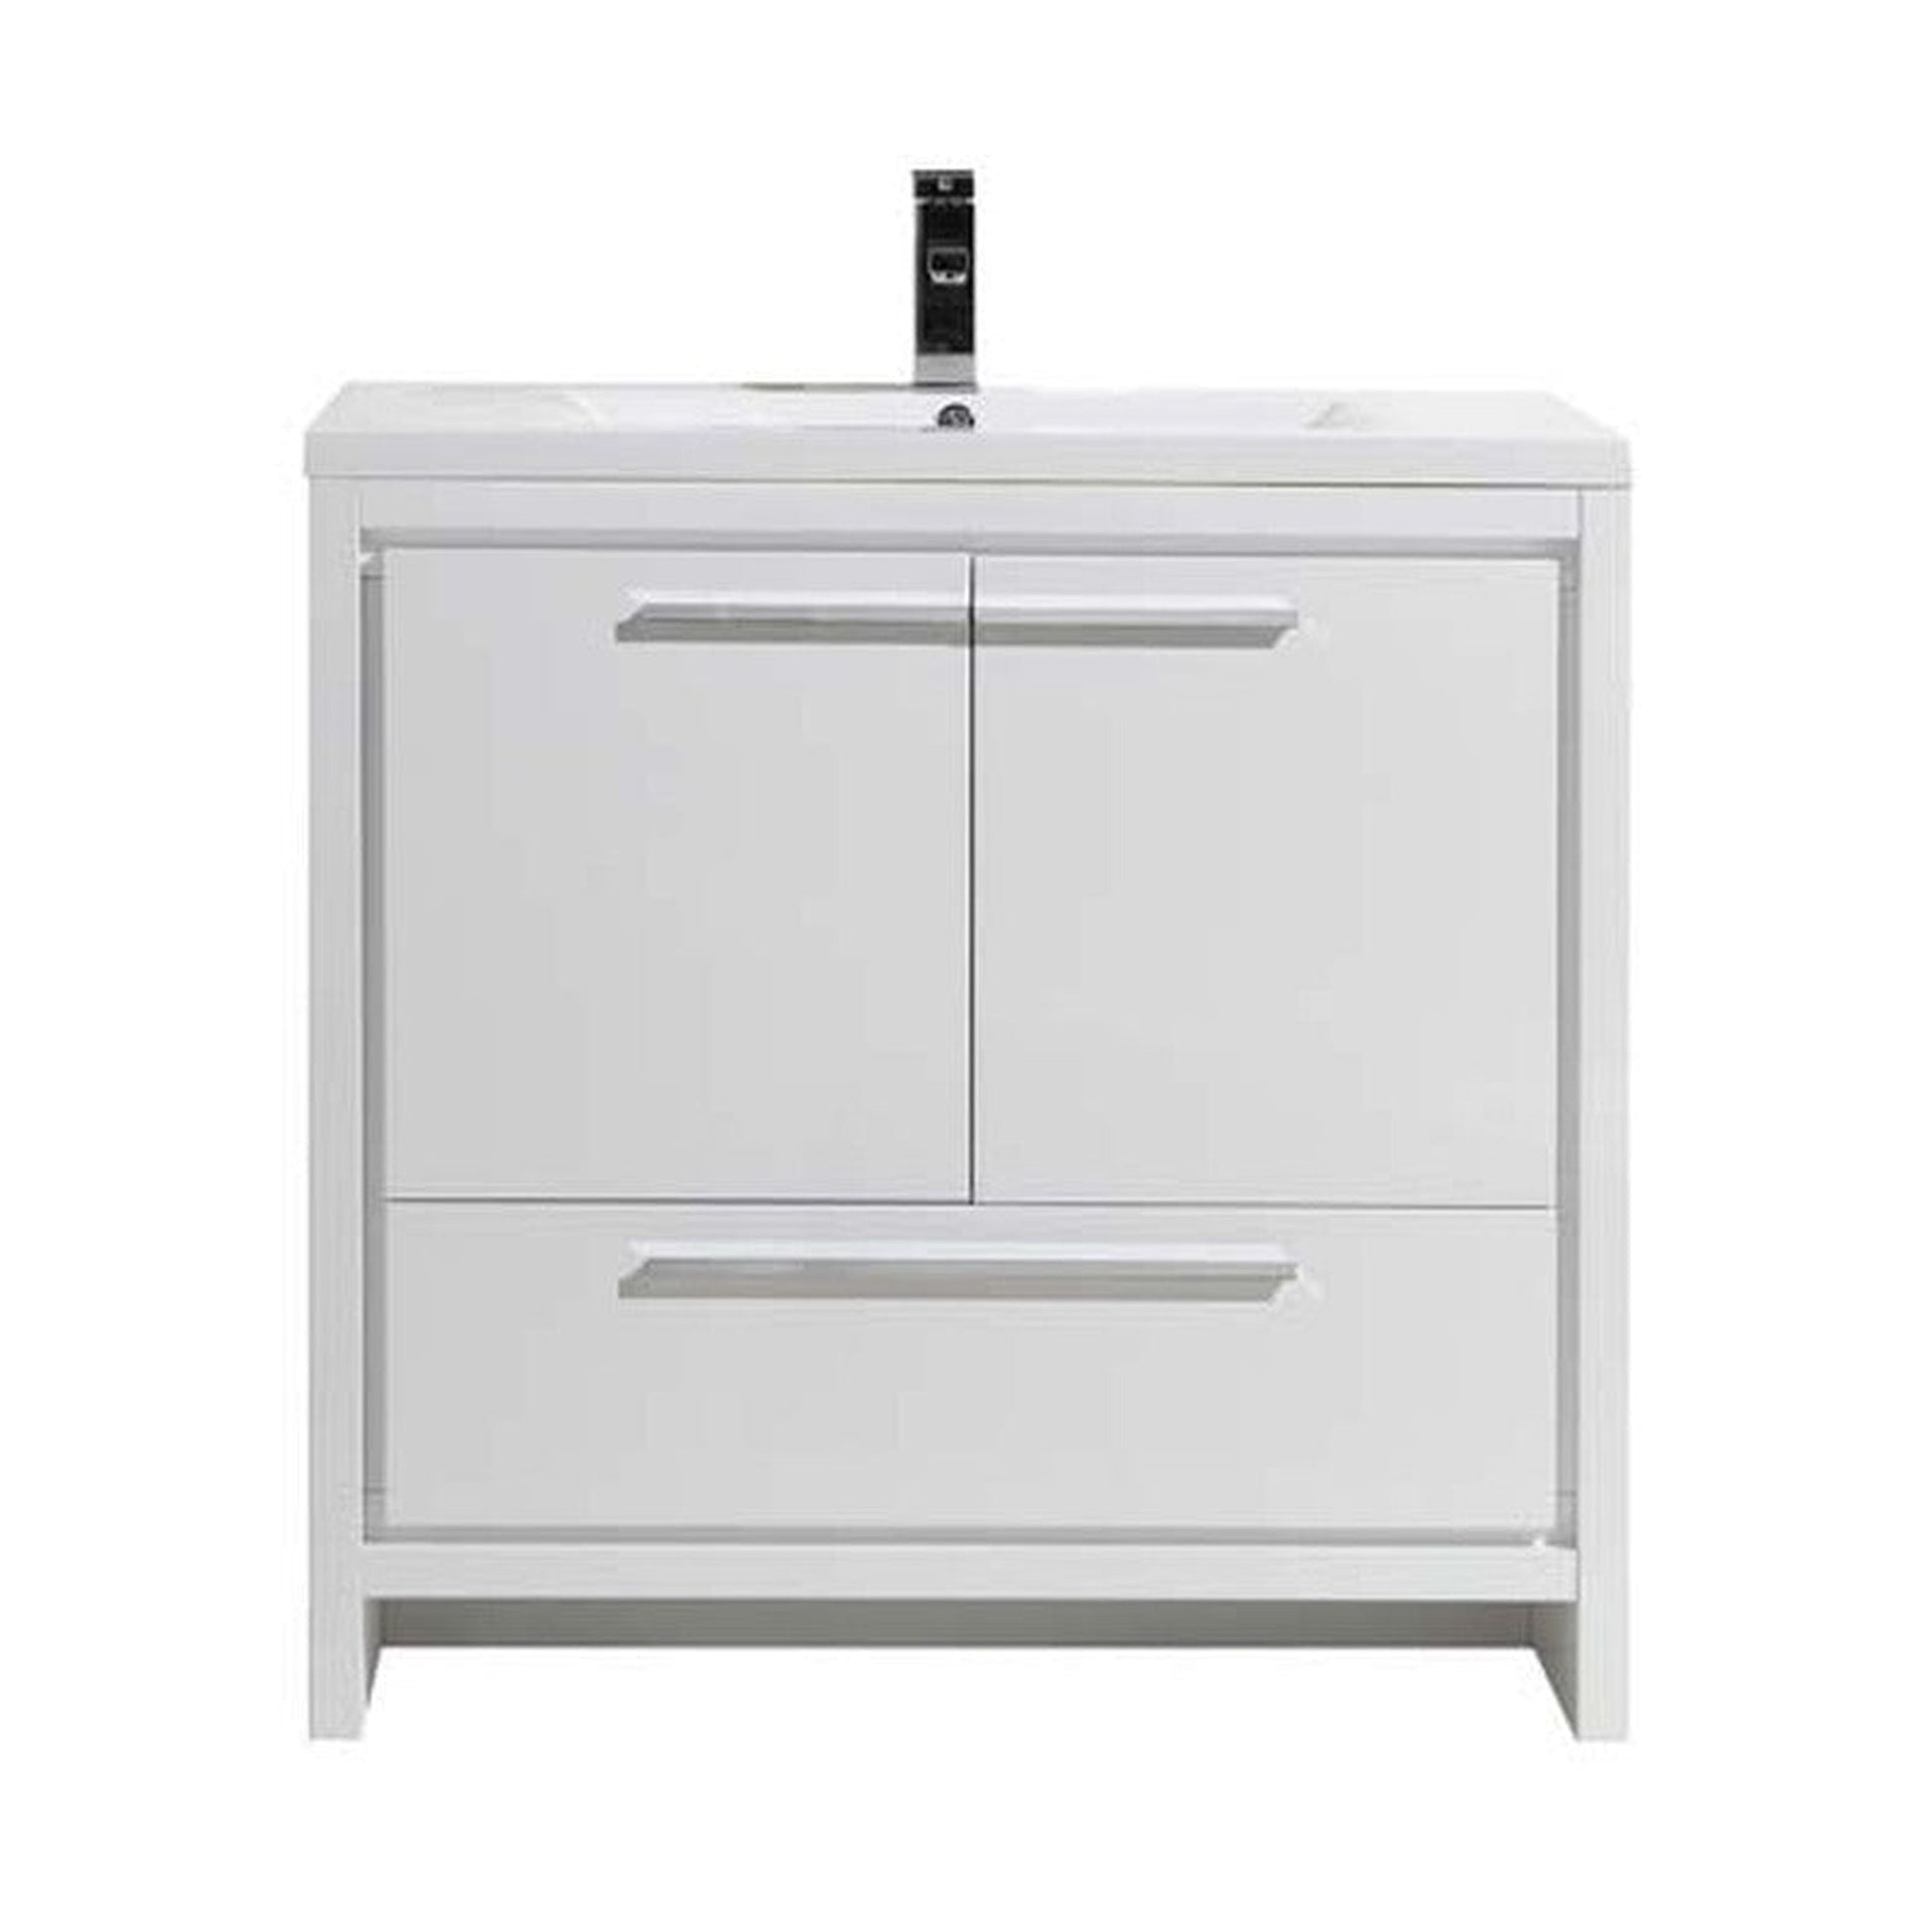 Moreno Bath Dolce 36" High Gloss White Freestanding Vanity With Single Reinforced White Acrylic Sink